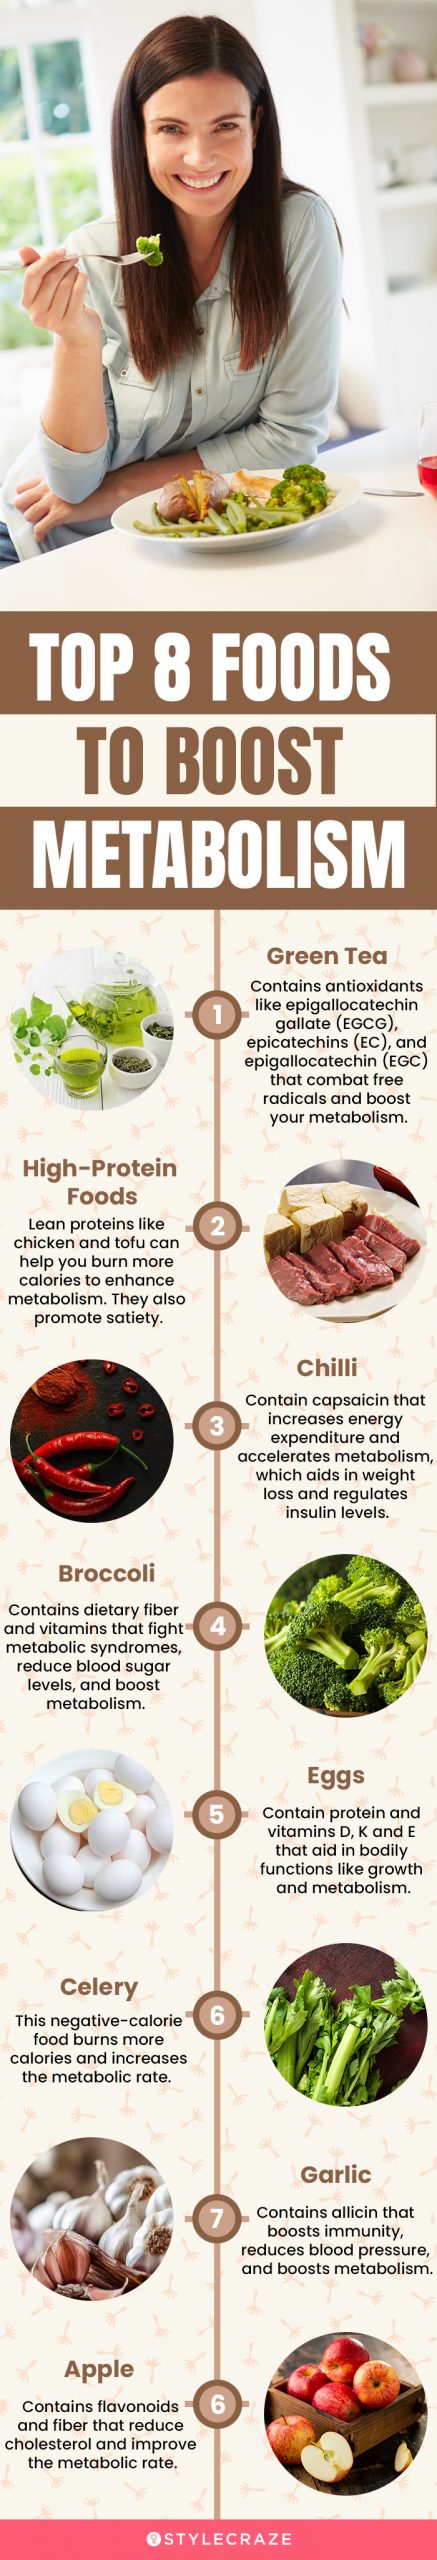 What foods boost your metabolism at night?